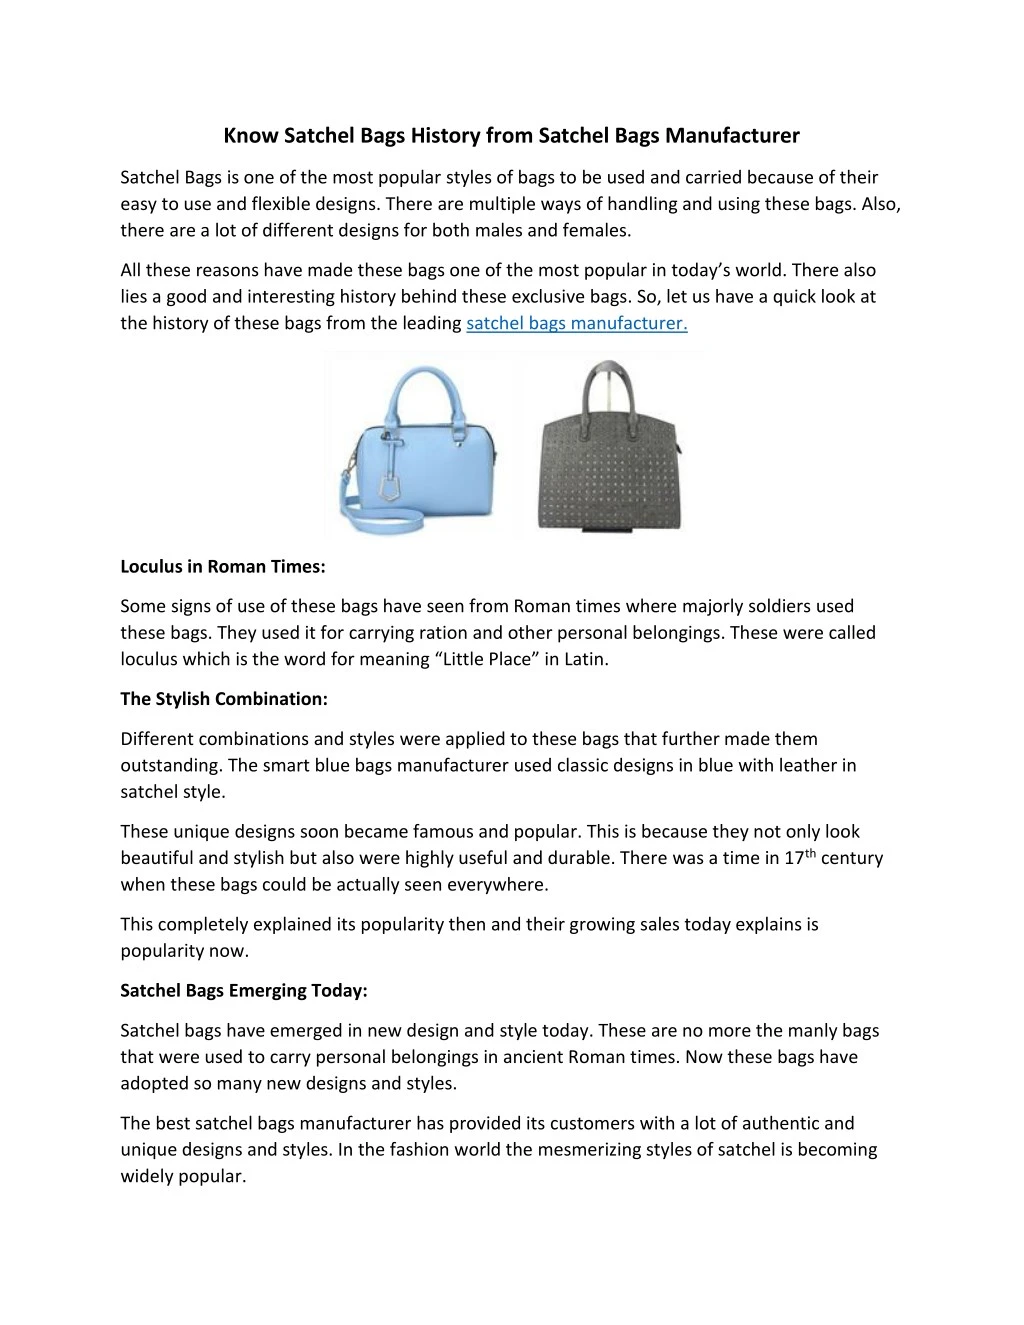 know satchel bags history from satchel bags